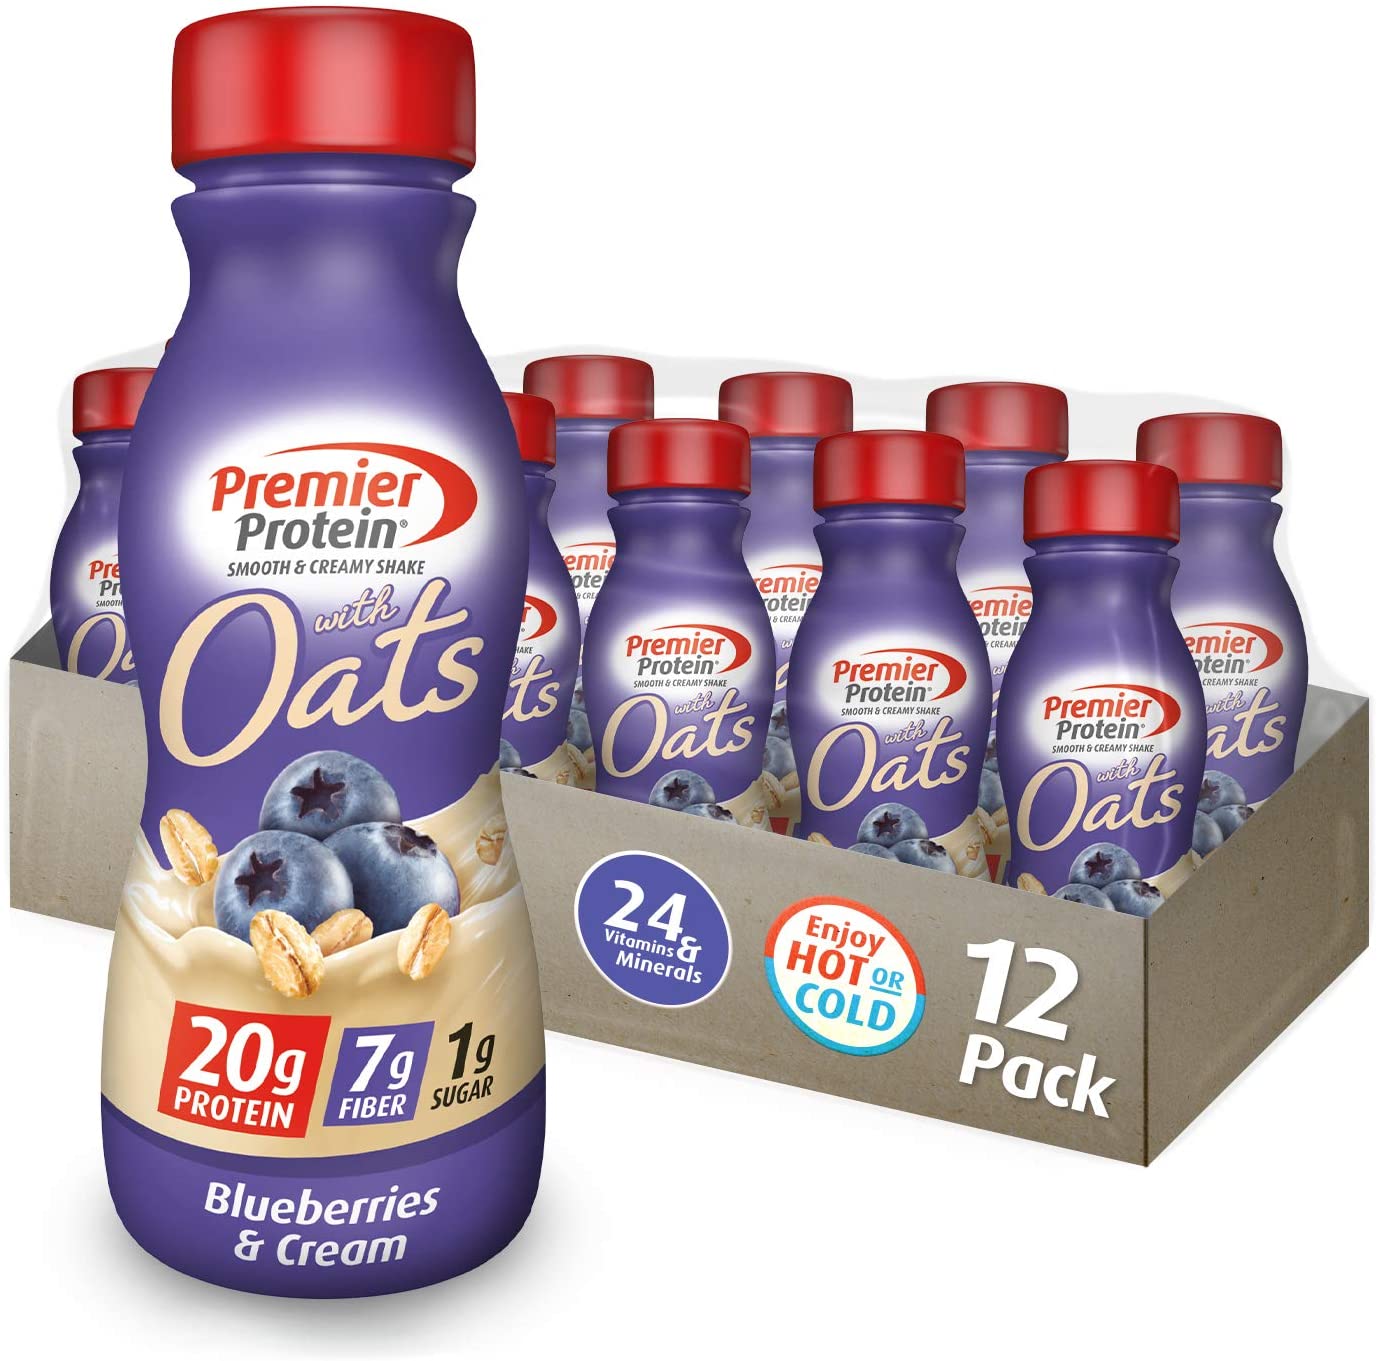 Premier Protein 20g Protein Shake with Oats, Blueberries and Cream - 12'li Paket-2